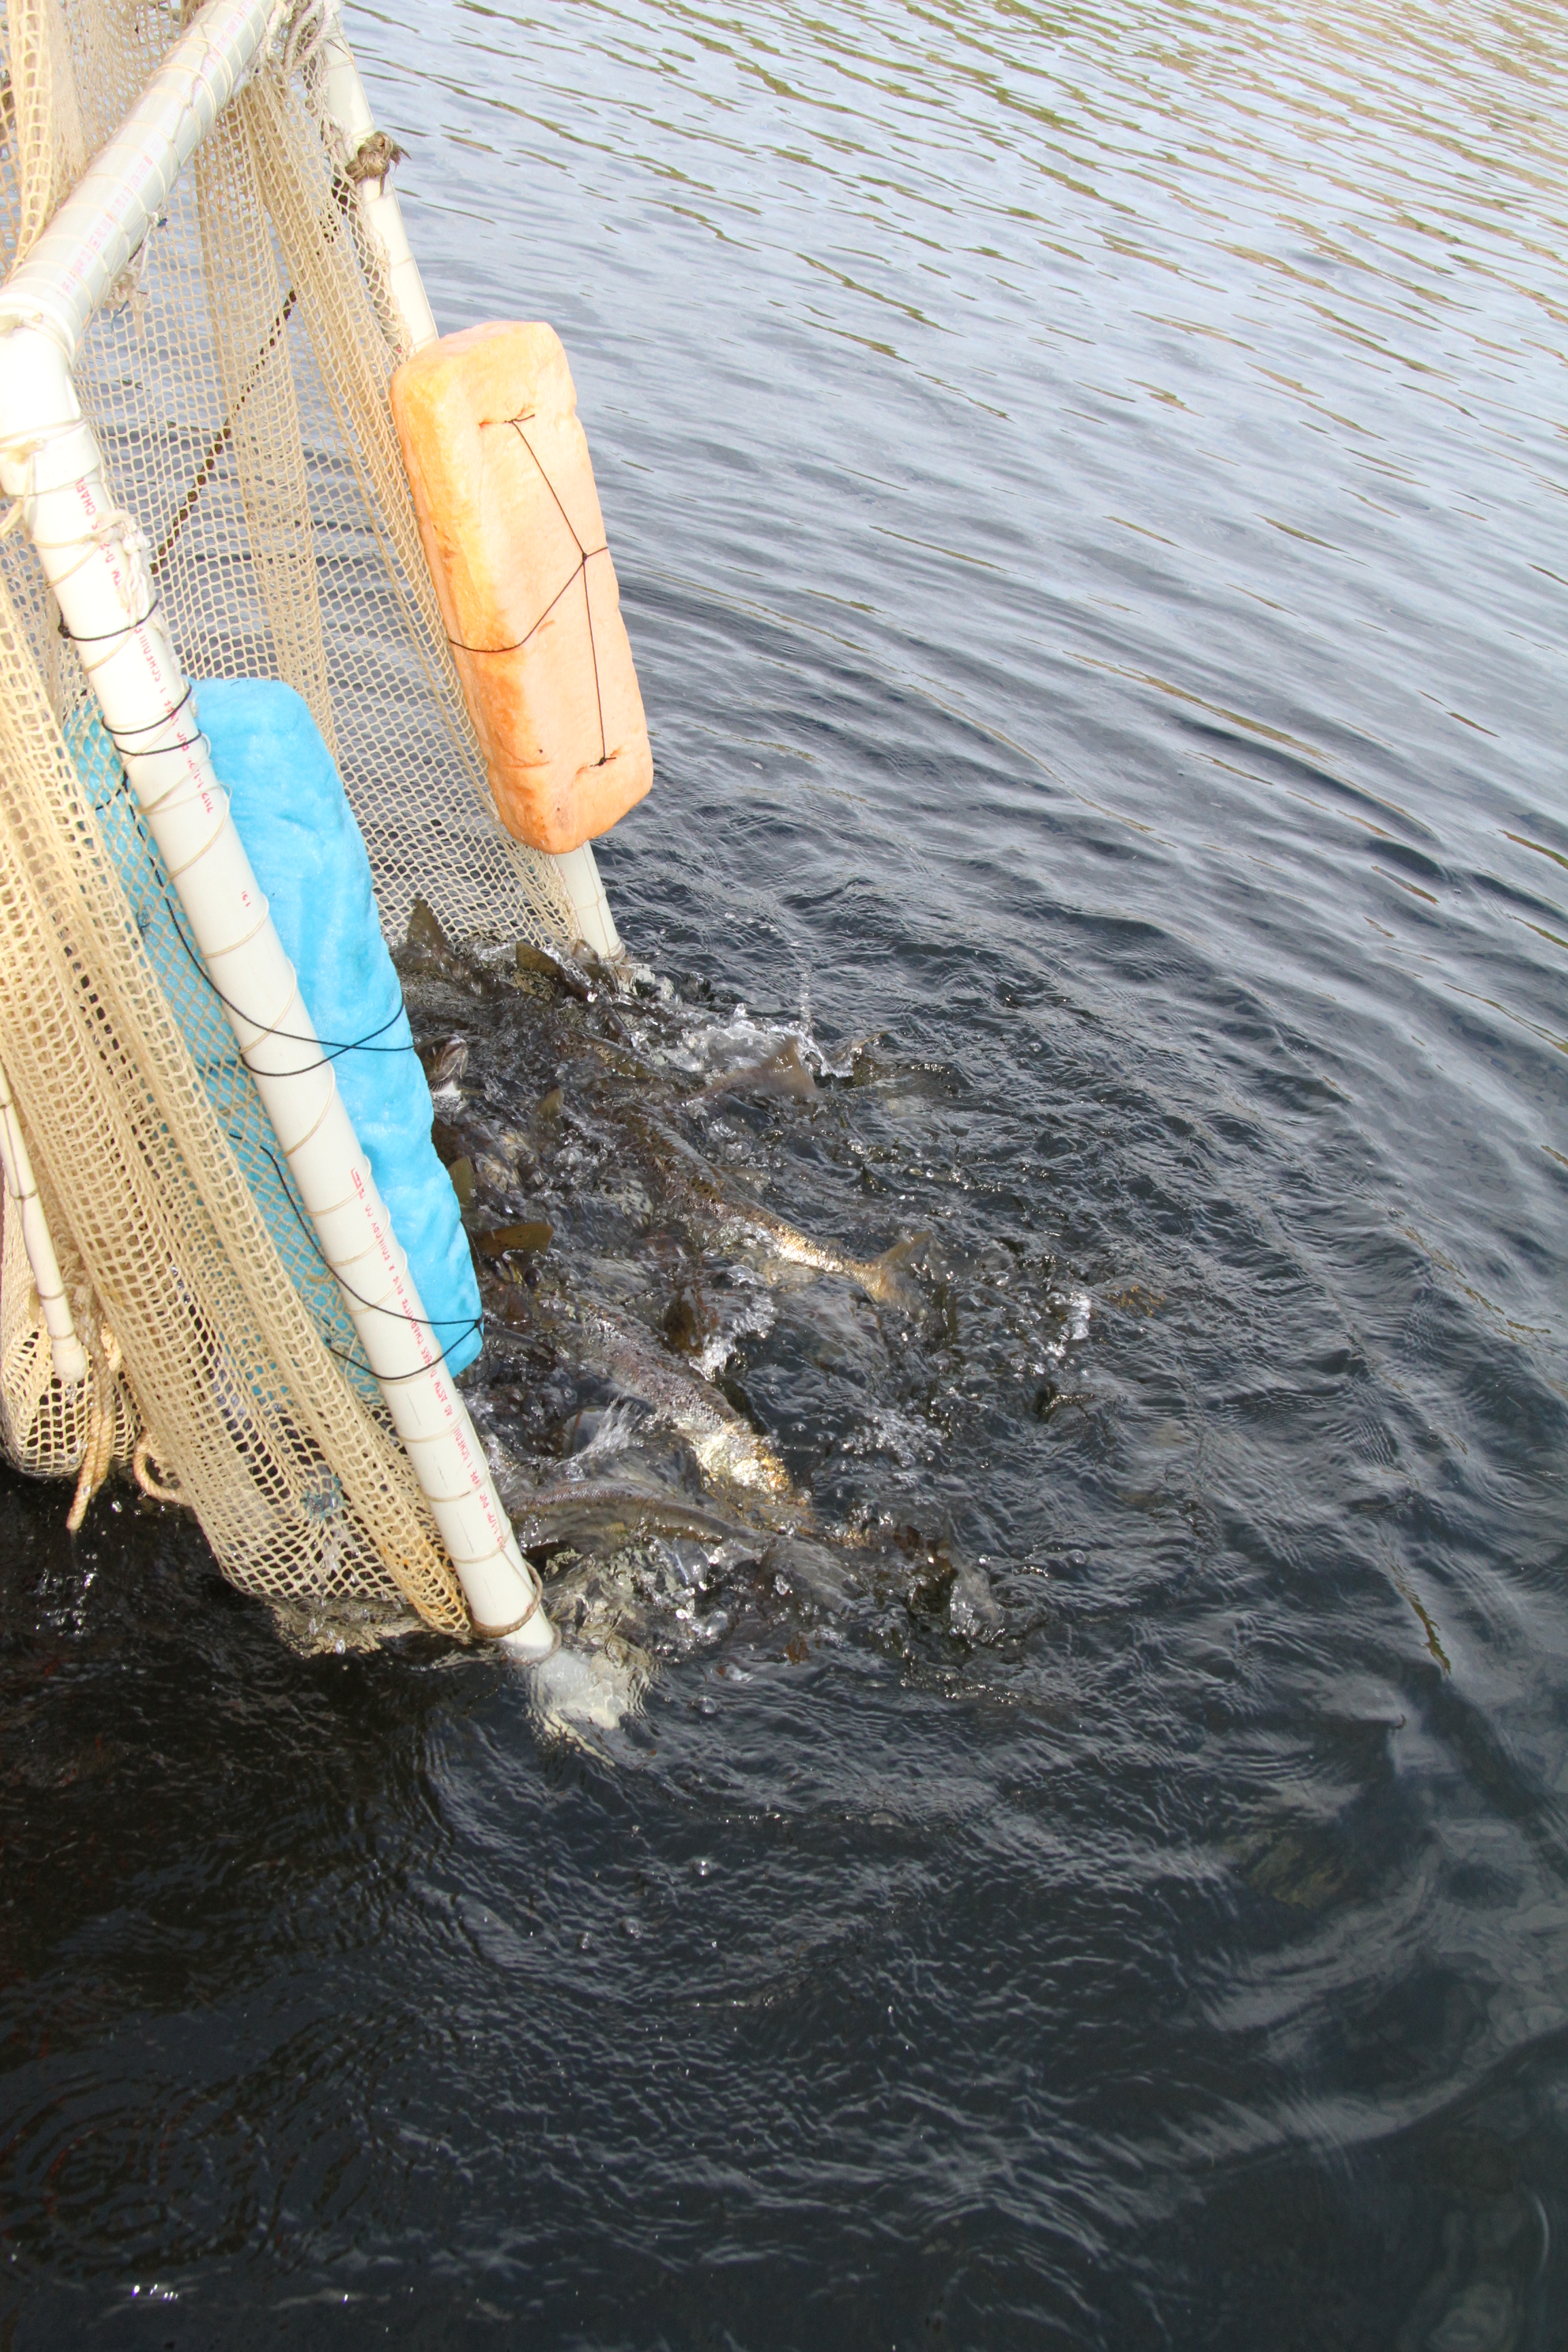 Once the salmon have been stripped of their eggs or milt, they are released back into West Grand Lake.